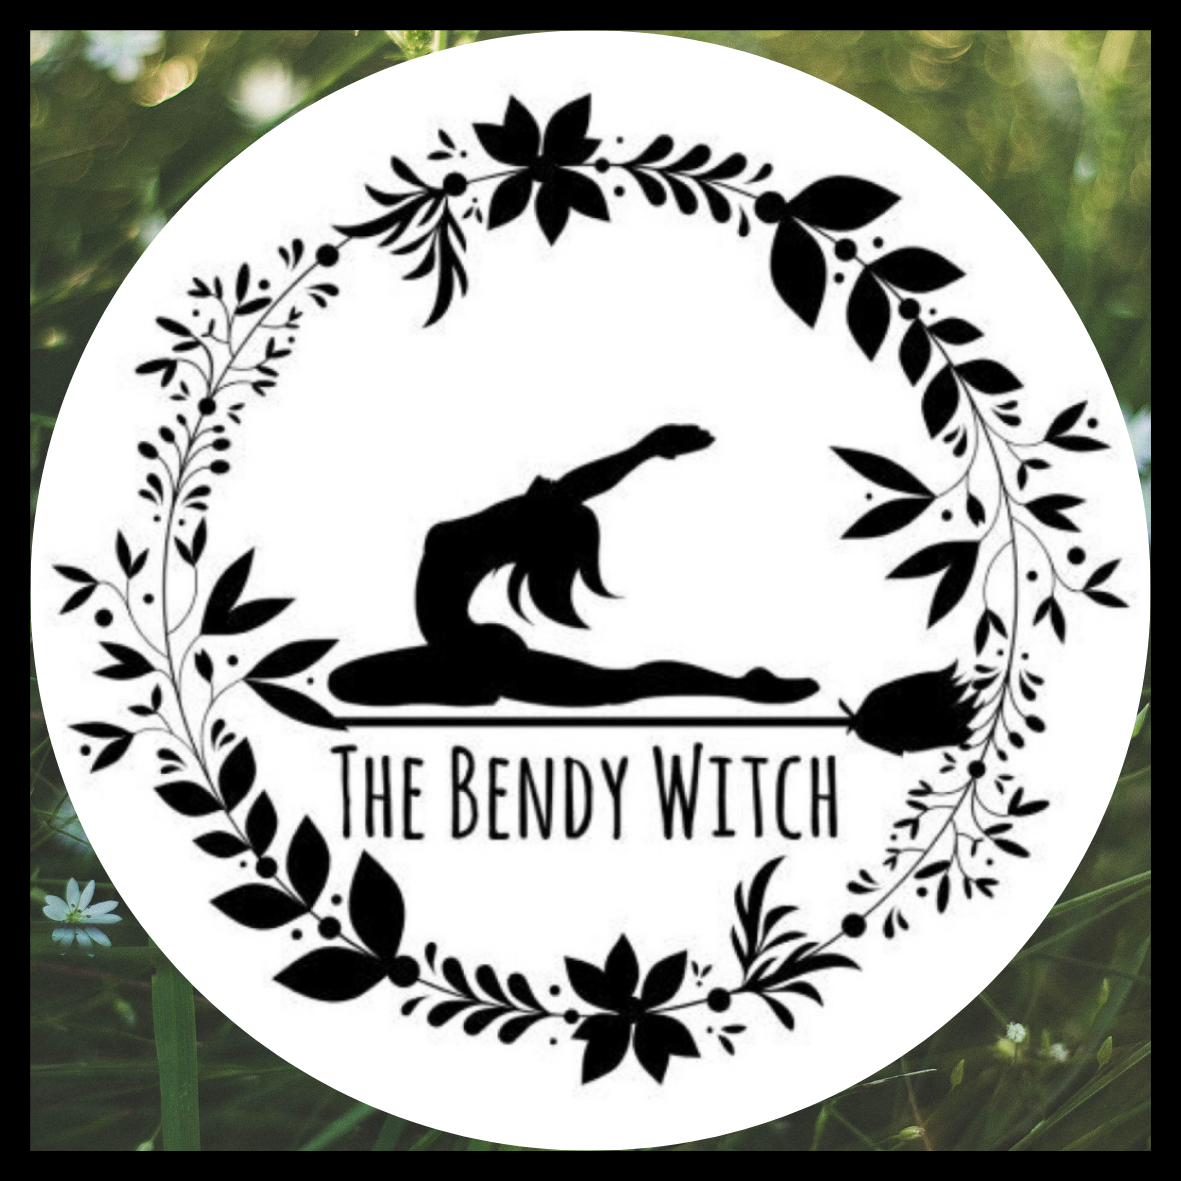 The Bendy Witch